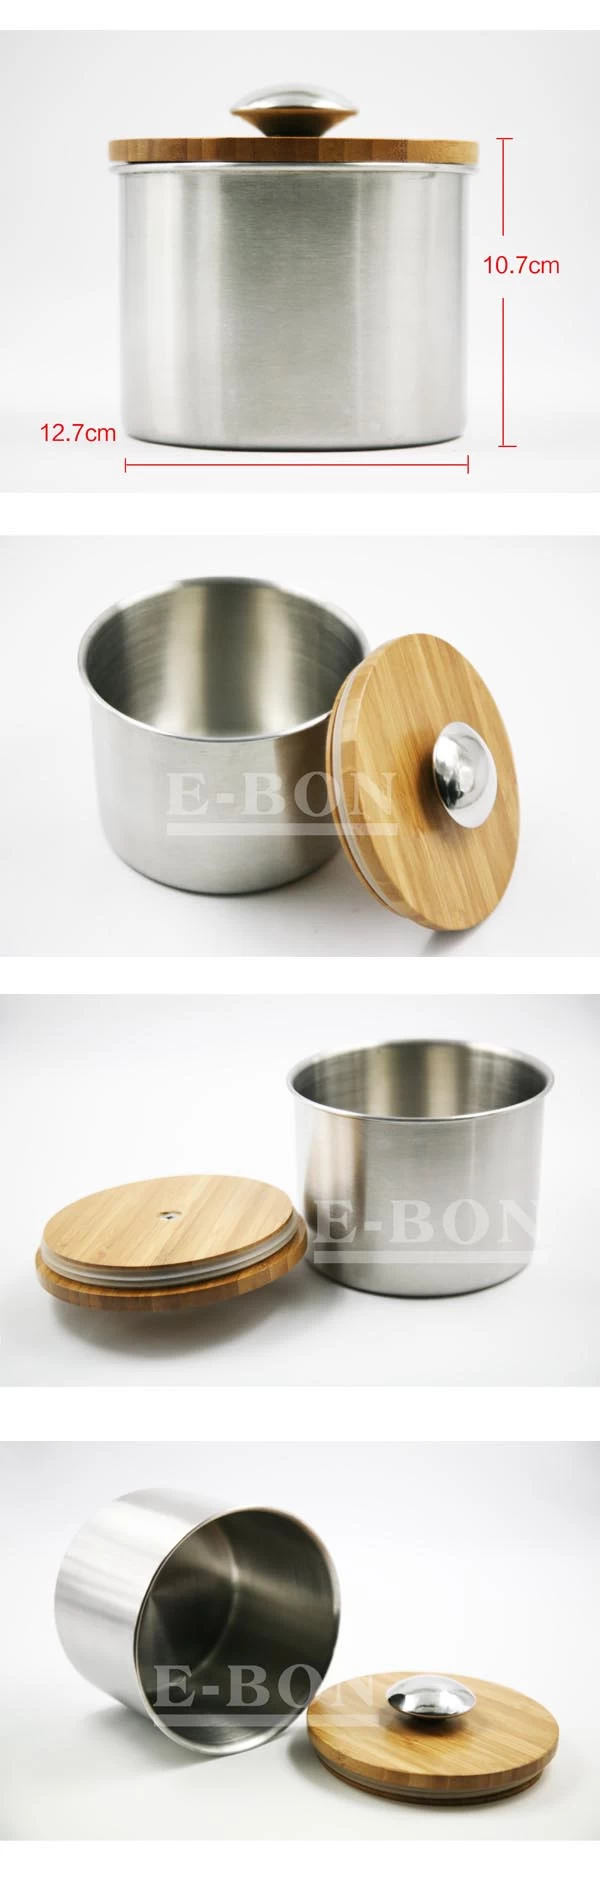 Stainless steel Canister 